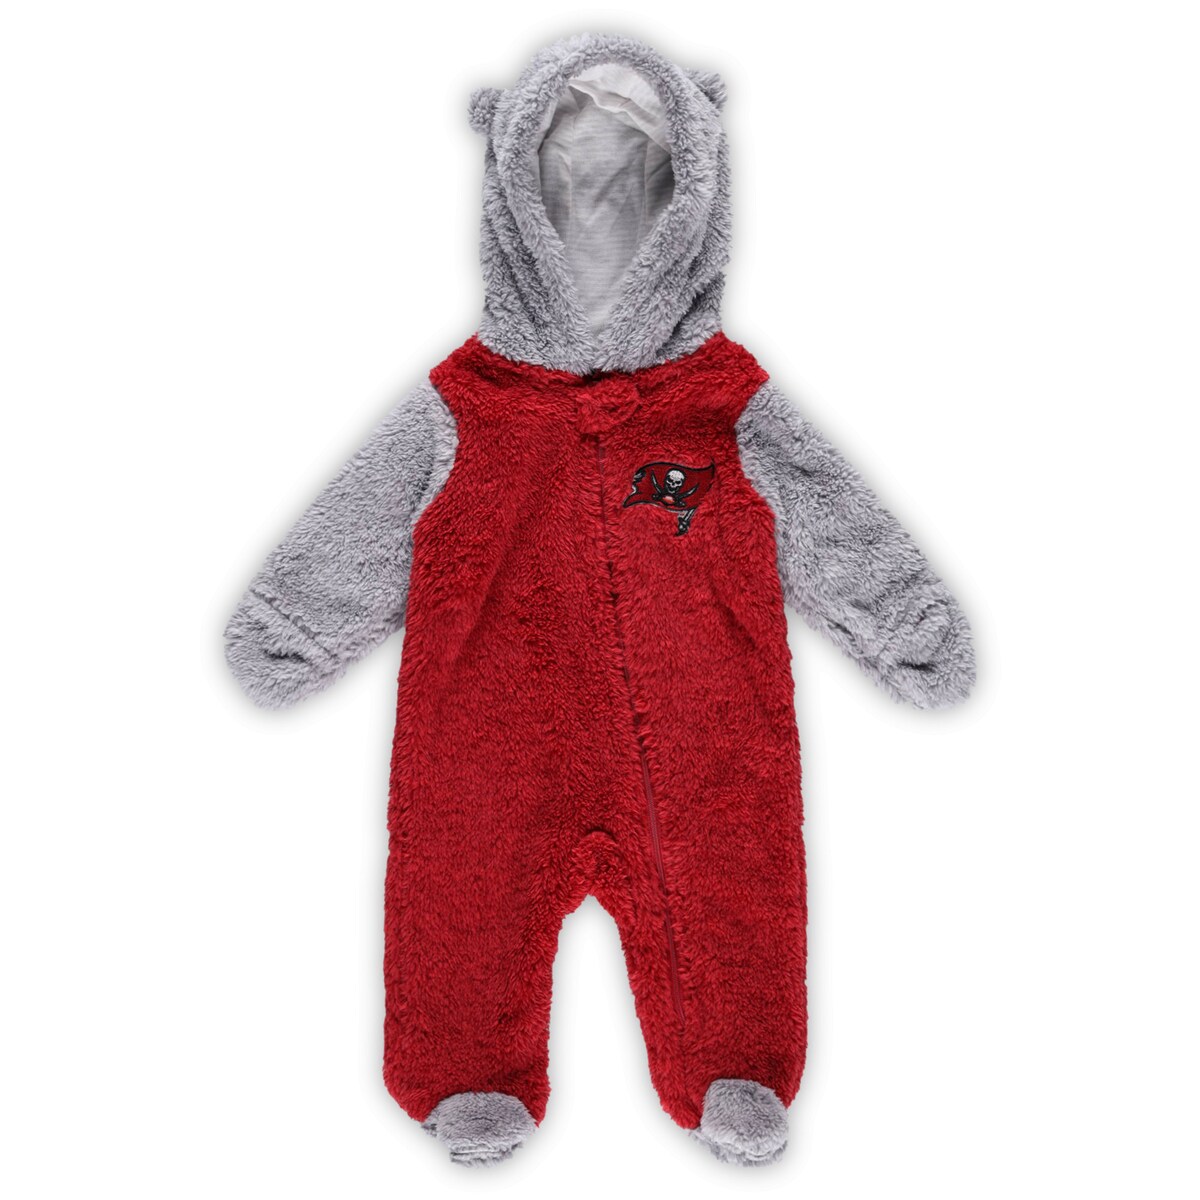 Keep the youngest Tampa Bay Buccaneers fan in your life cozy and comfortable with this Game Nap Teddy Bunting full-zip sleeper. It features soft fleece lining, fold-over mittens and footed bottoms for extra warmth. The embroidered Tampa Bay Buccaneers logo adds the perfect amount of team spirit for a future supporter.Machine wash with garment inside out, tumble dry lowLong sleeveSnap closure at neckOfficially licensedHood without drawstringImportedInseam on size 0-3 M measures approx. 7''Fabric earsFootedEmbroidered graphicsMaterial: 100% PolyesterFold-over mittensFleece liningFull-zipBrand: Outerstuff